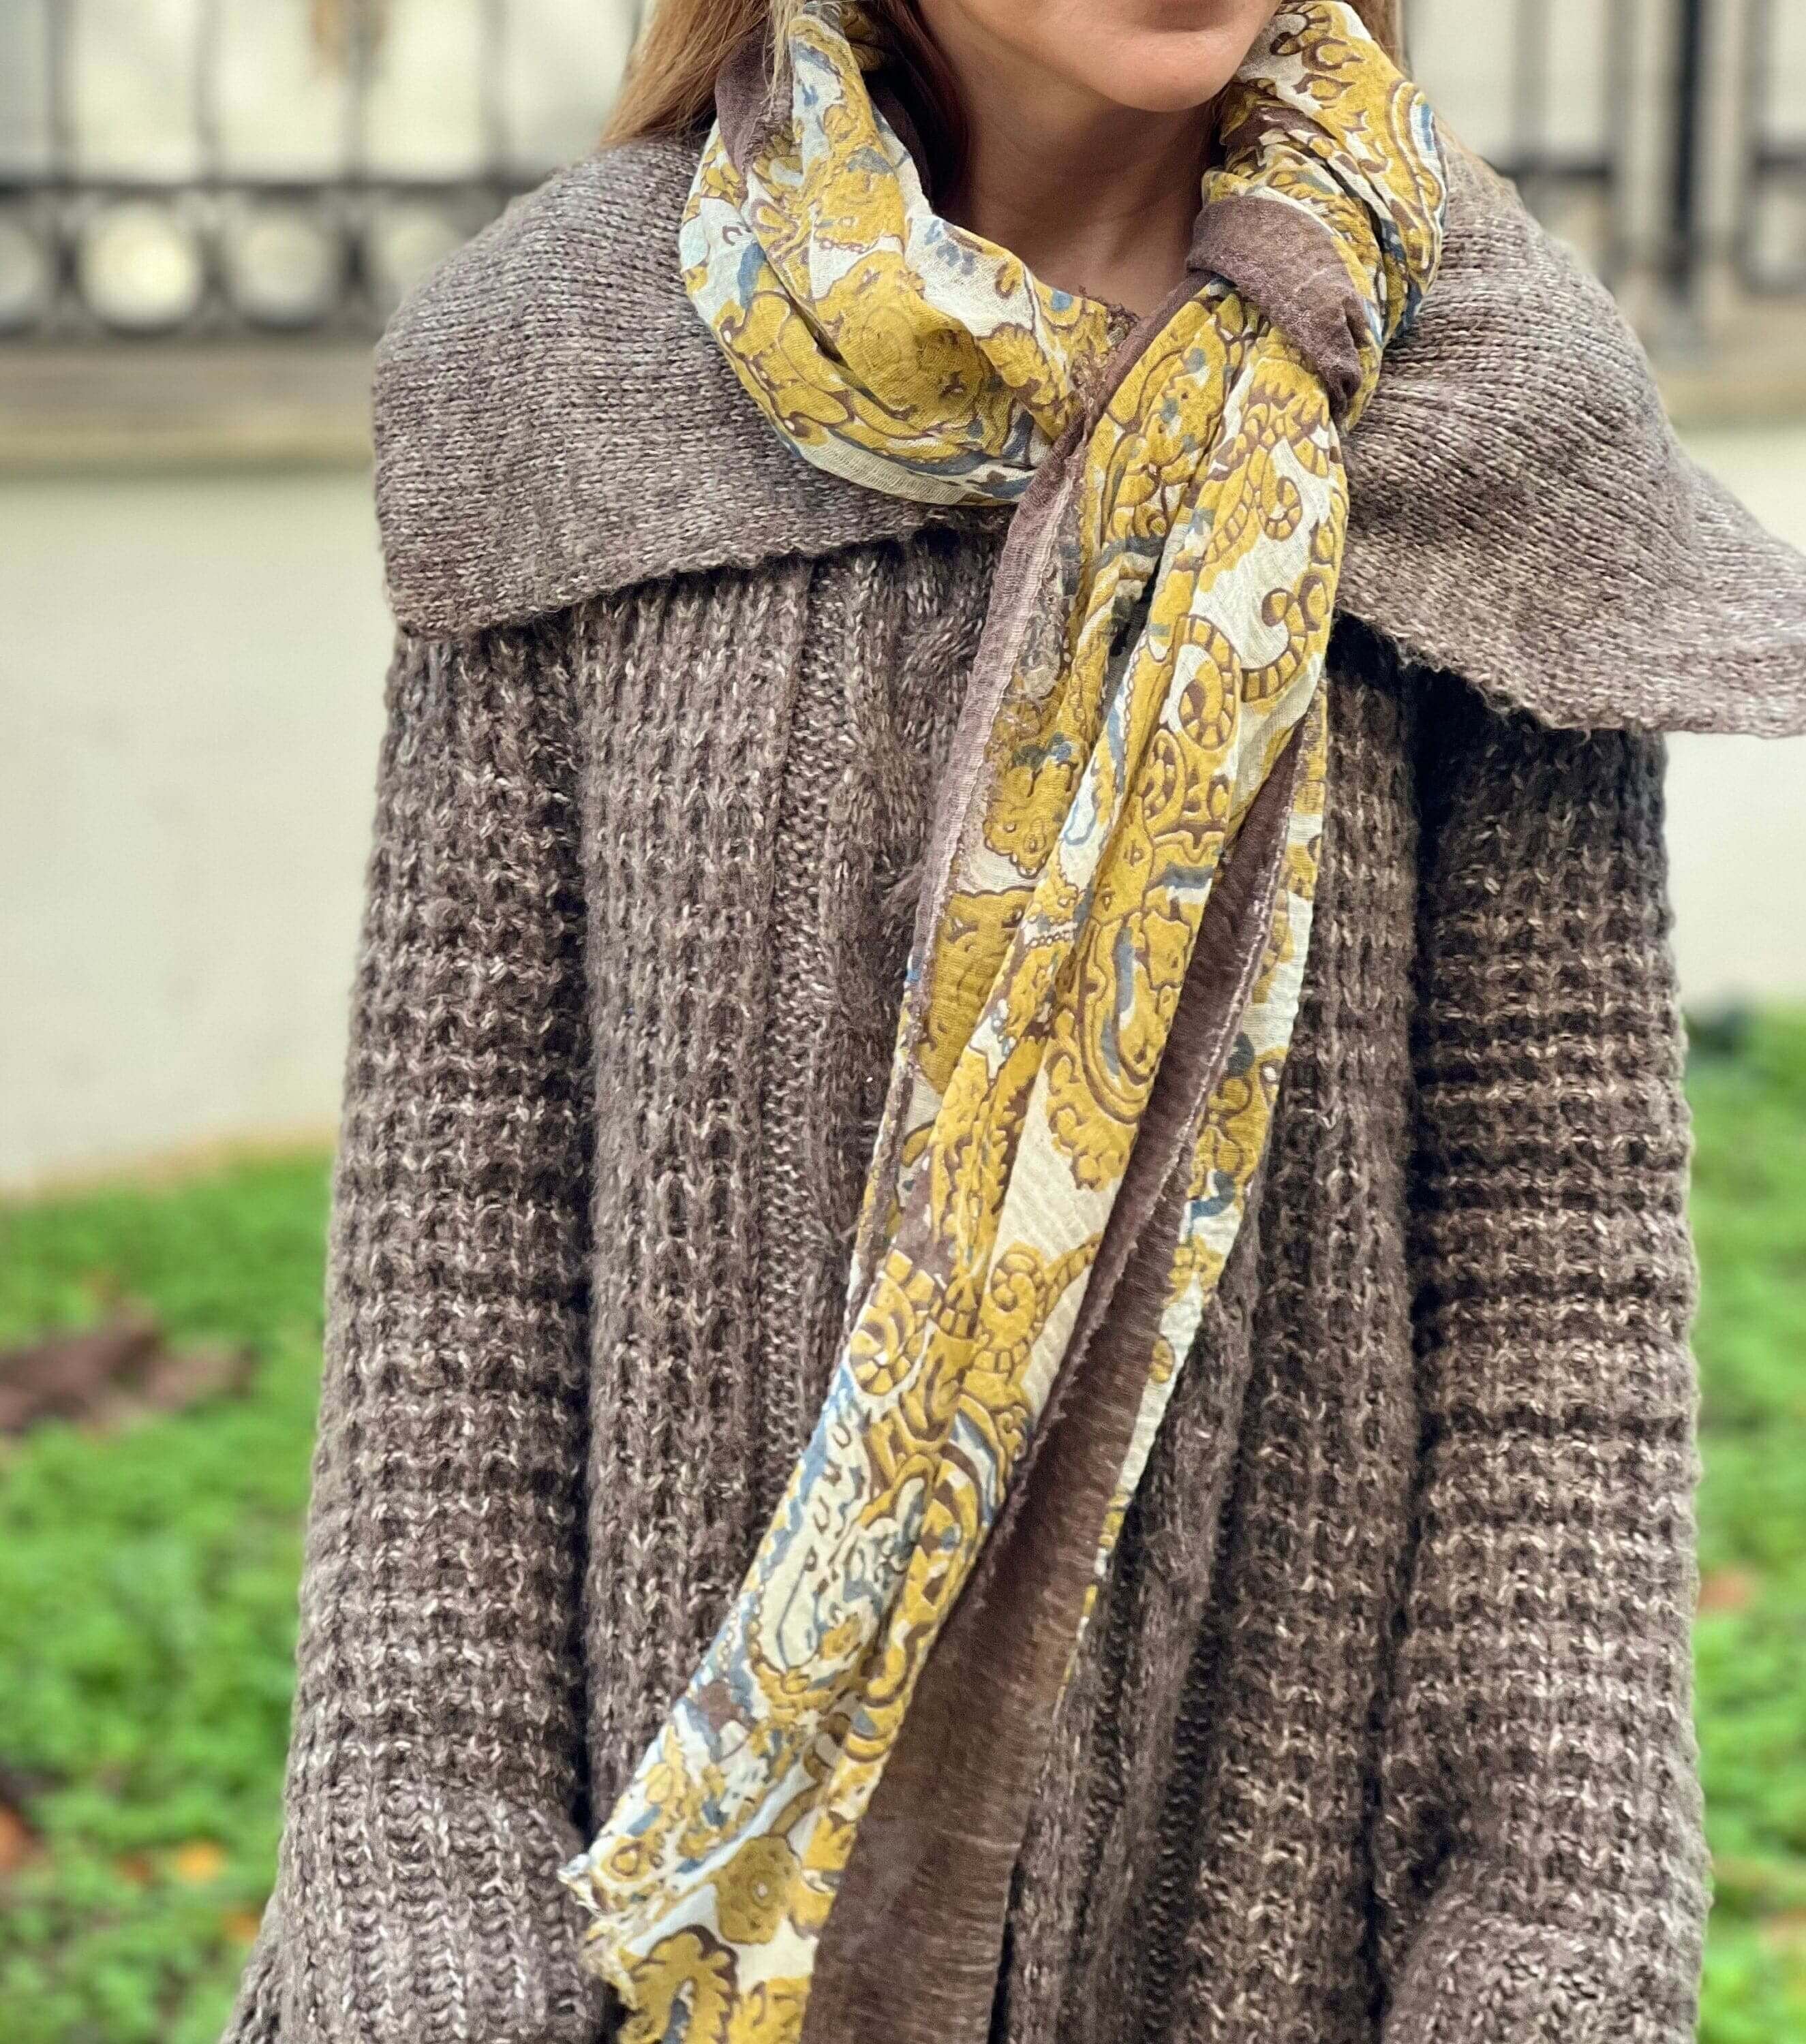 Looking for a soft, cozy scarf to keep you warm this winter? Our soft cotton scarf is perfect for you!